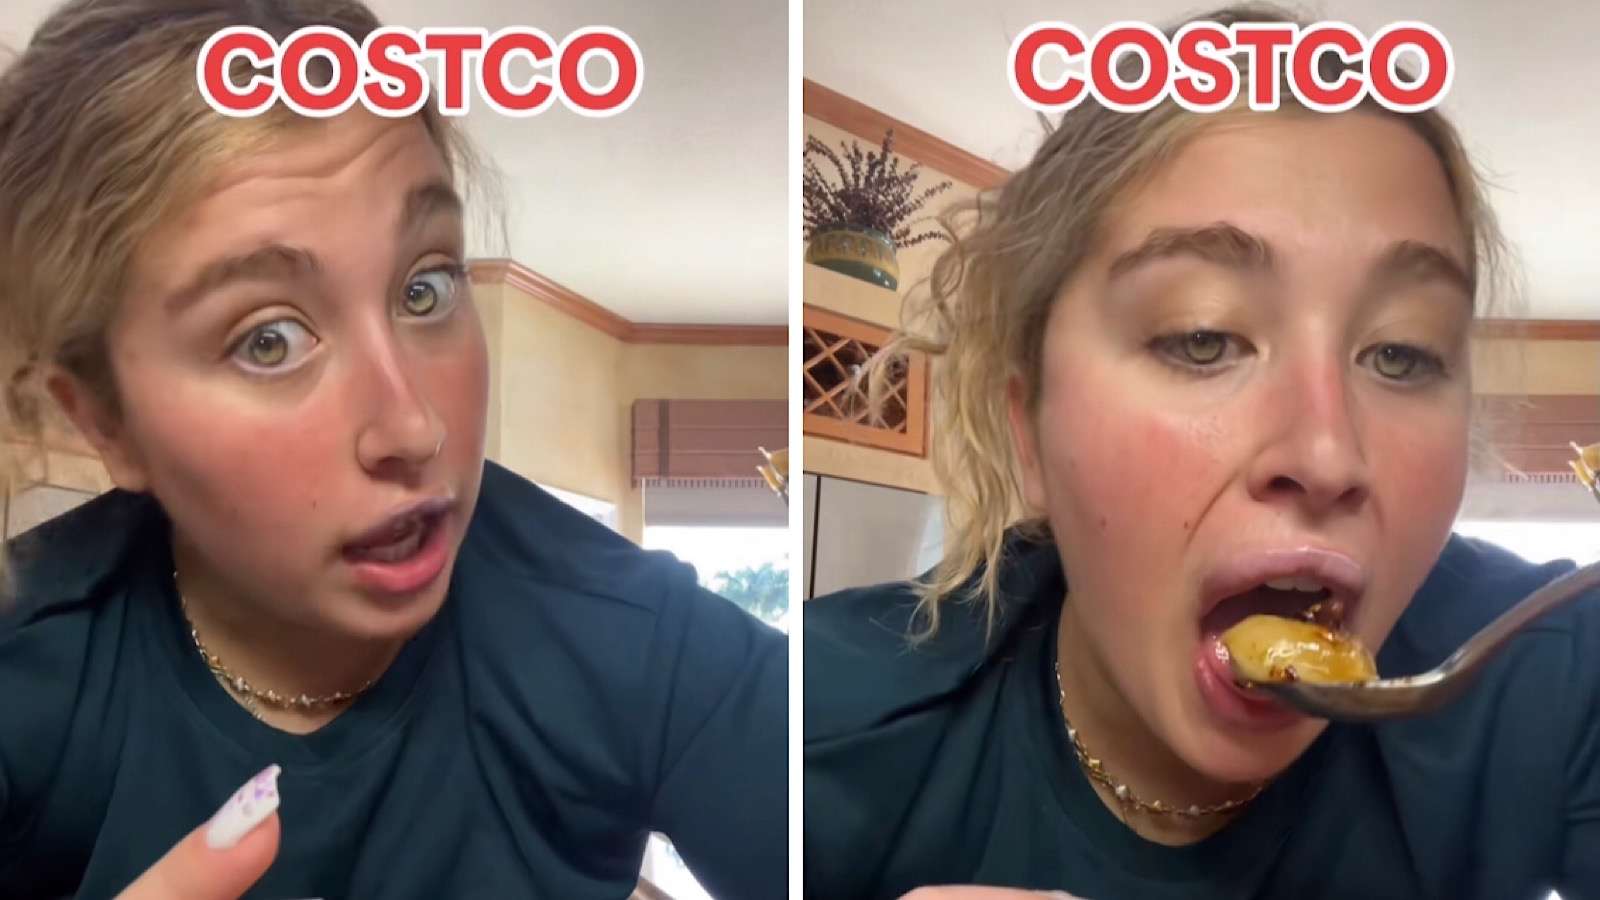 woman kicked out of costco for buying too many dumplings